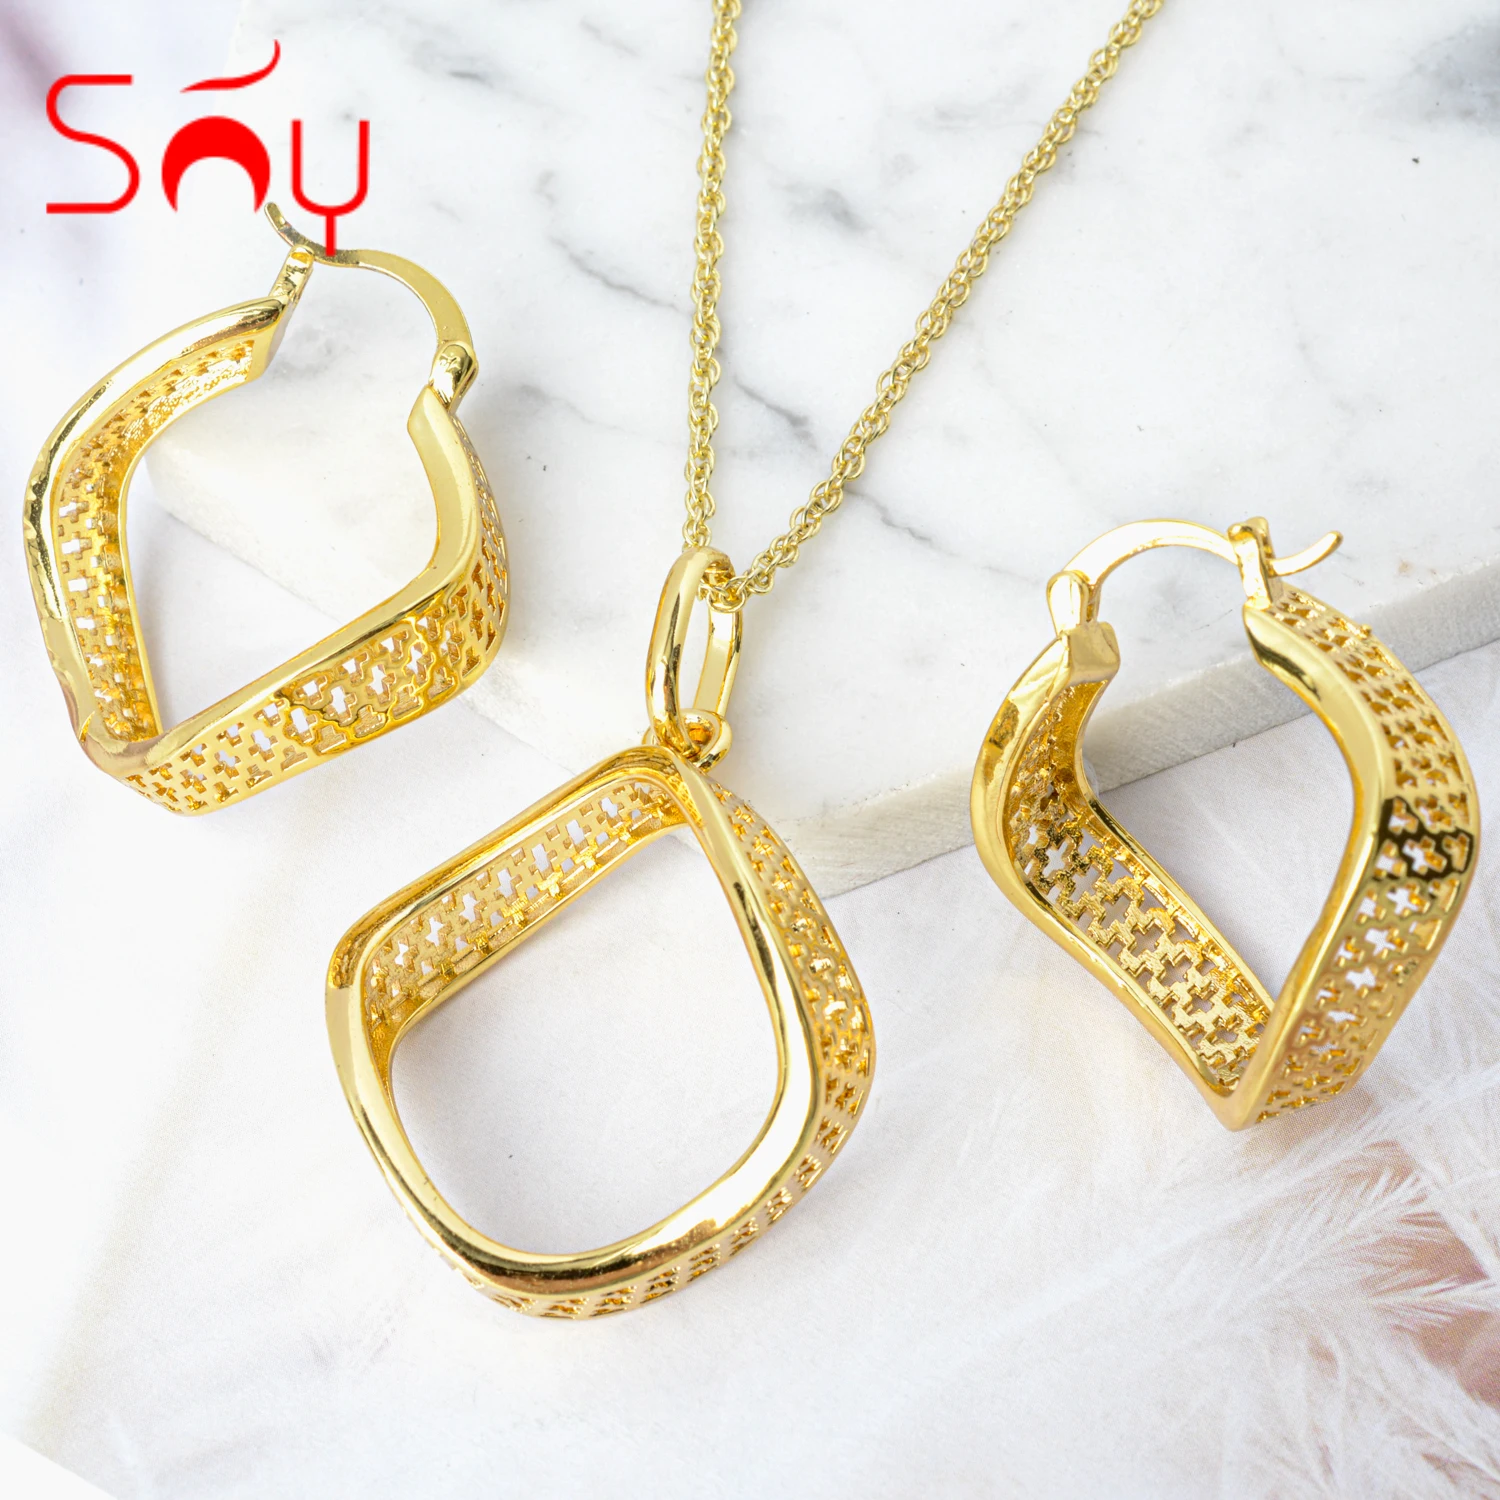 

Sunny Jewelry New Gold Plated Jewelry Sets Earrings Pendent Necklace For Women For Wedding Party Anniversary Gifts Trendy